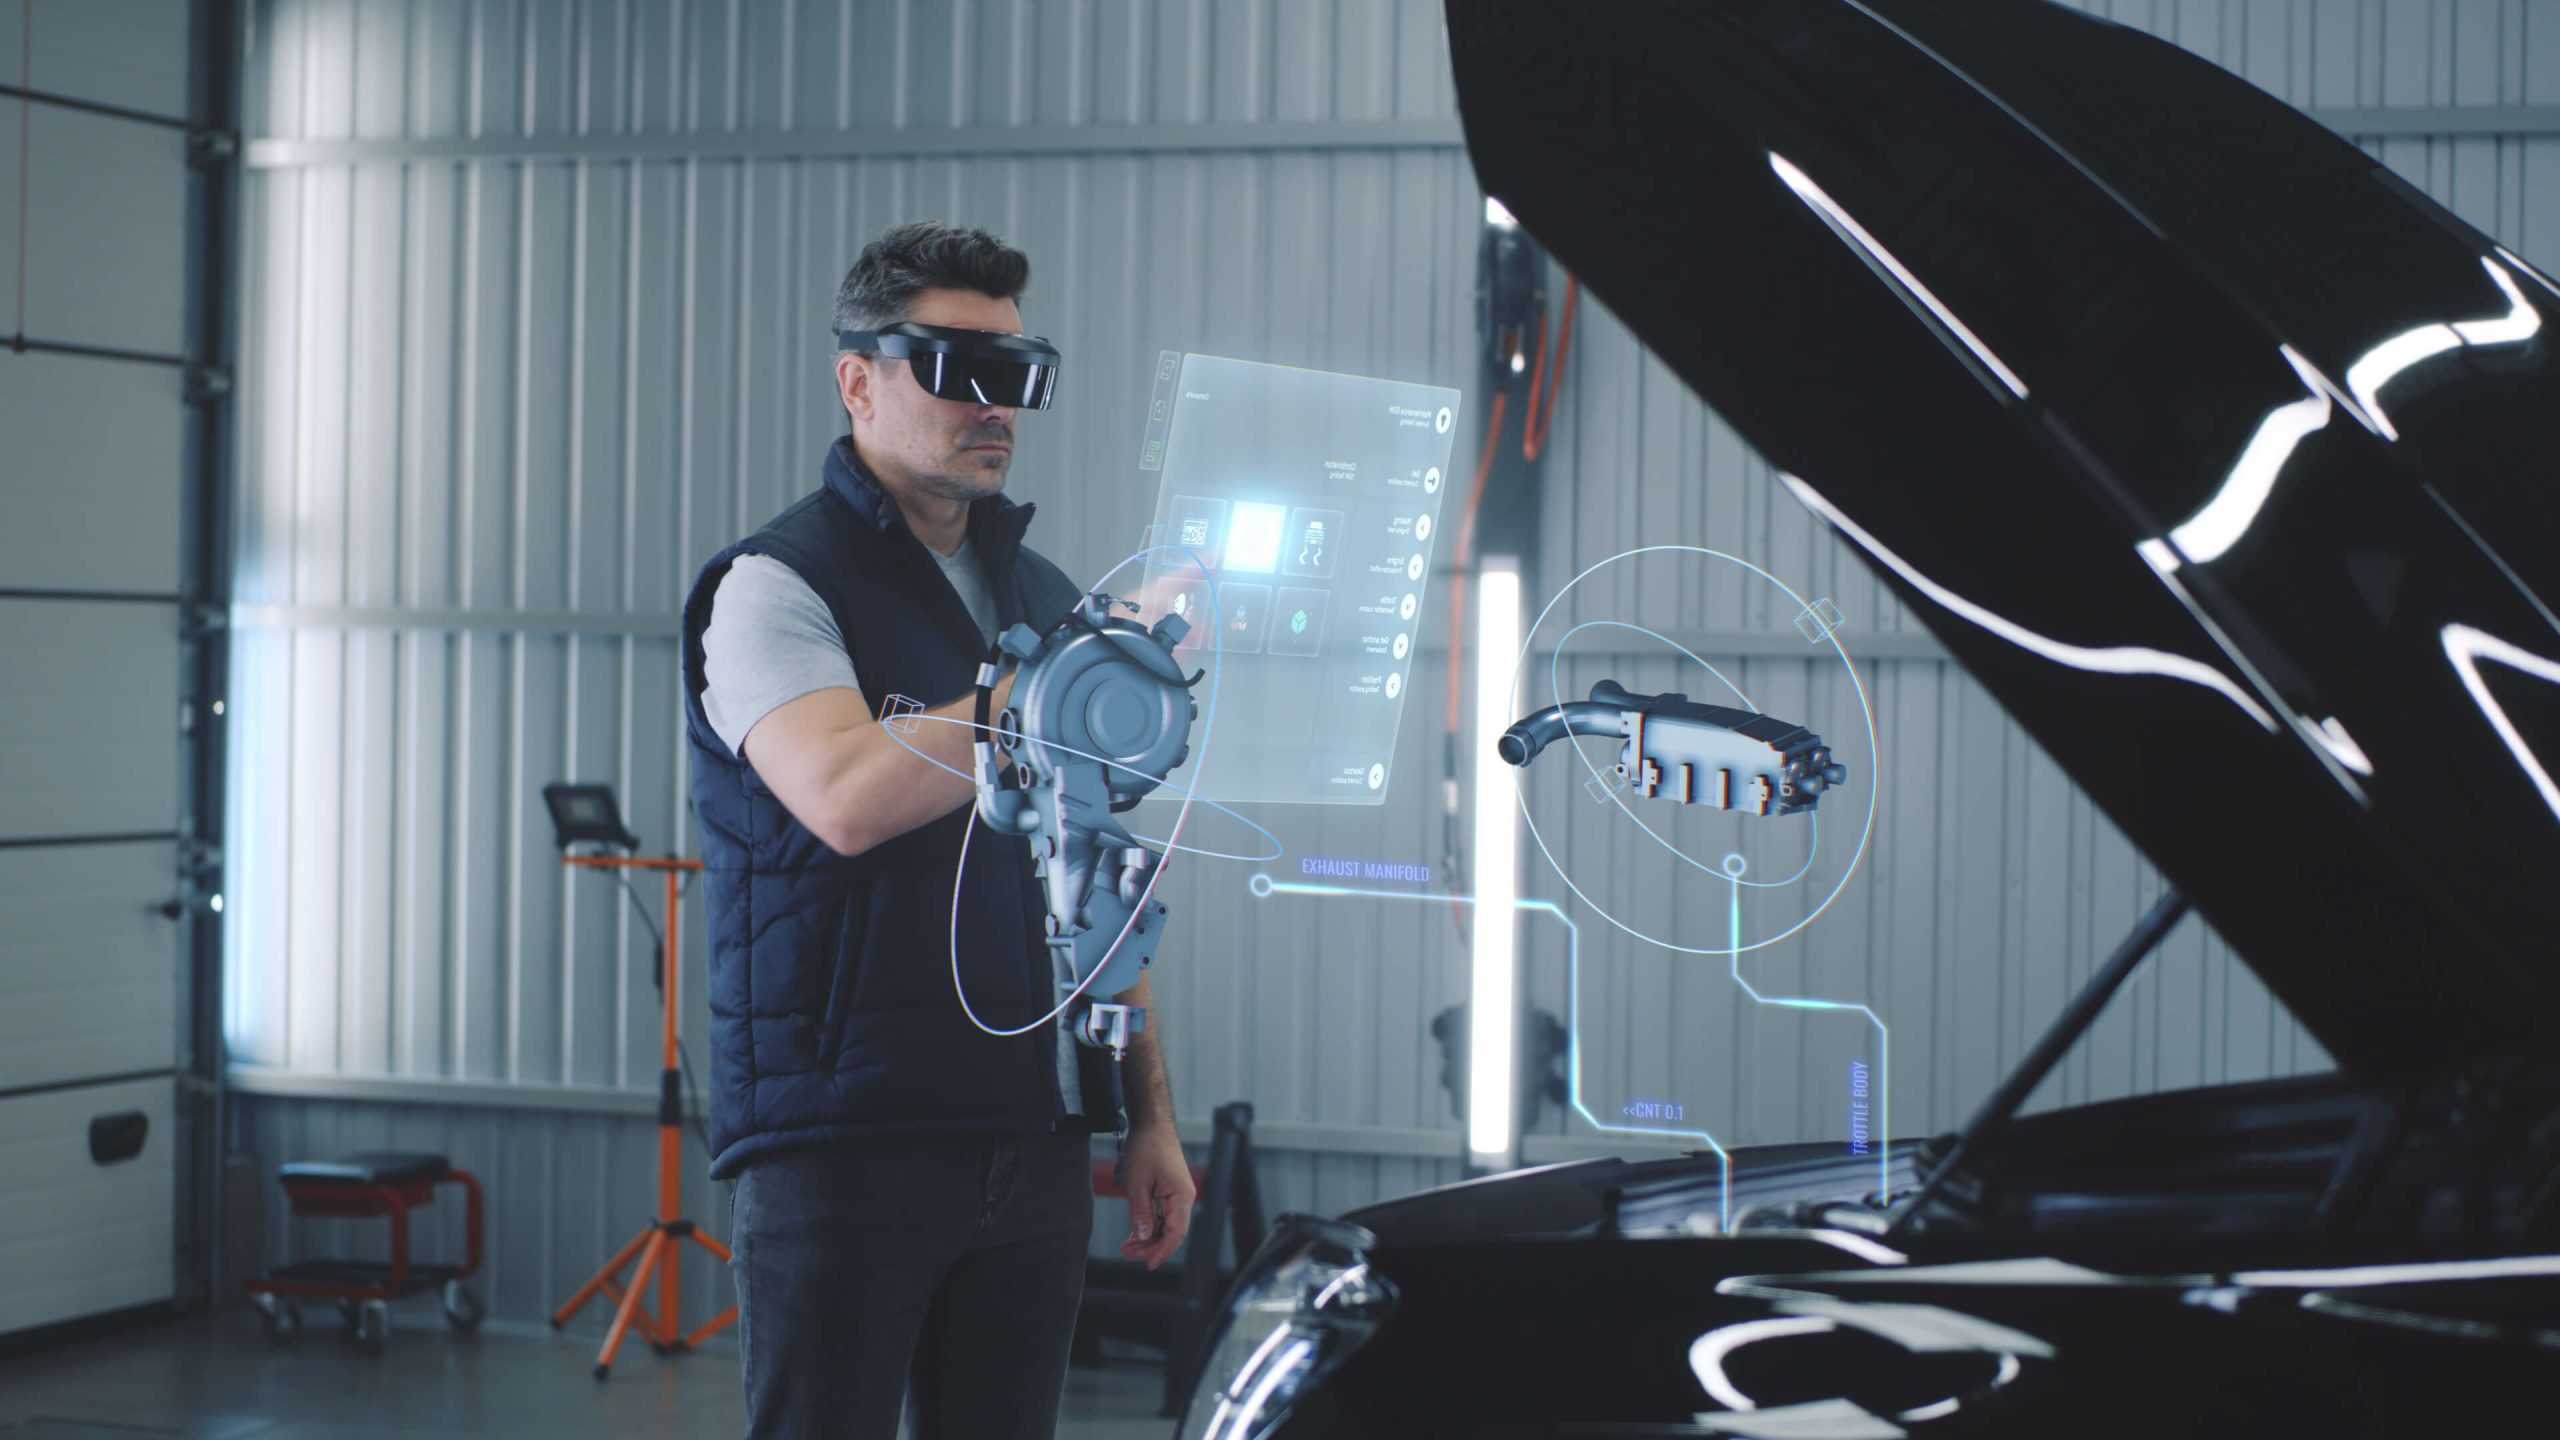 A mechanic or technician using augmented reality glasses to look at the engine bay of a vehicle and perform diagnosis.